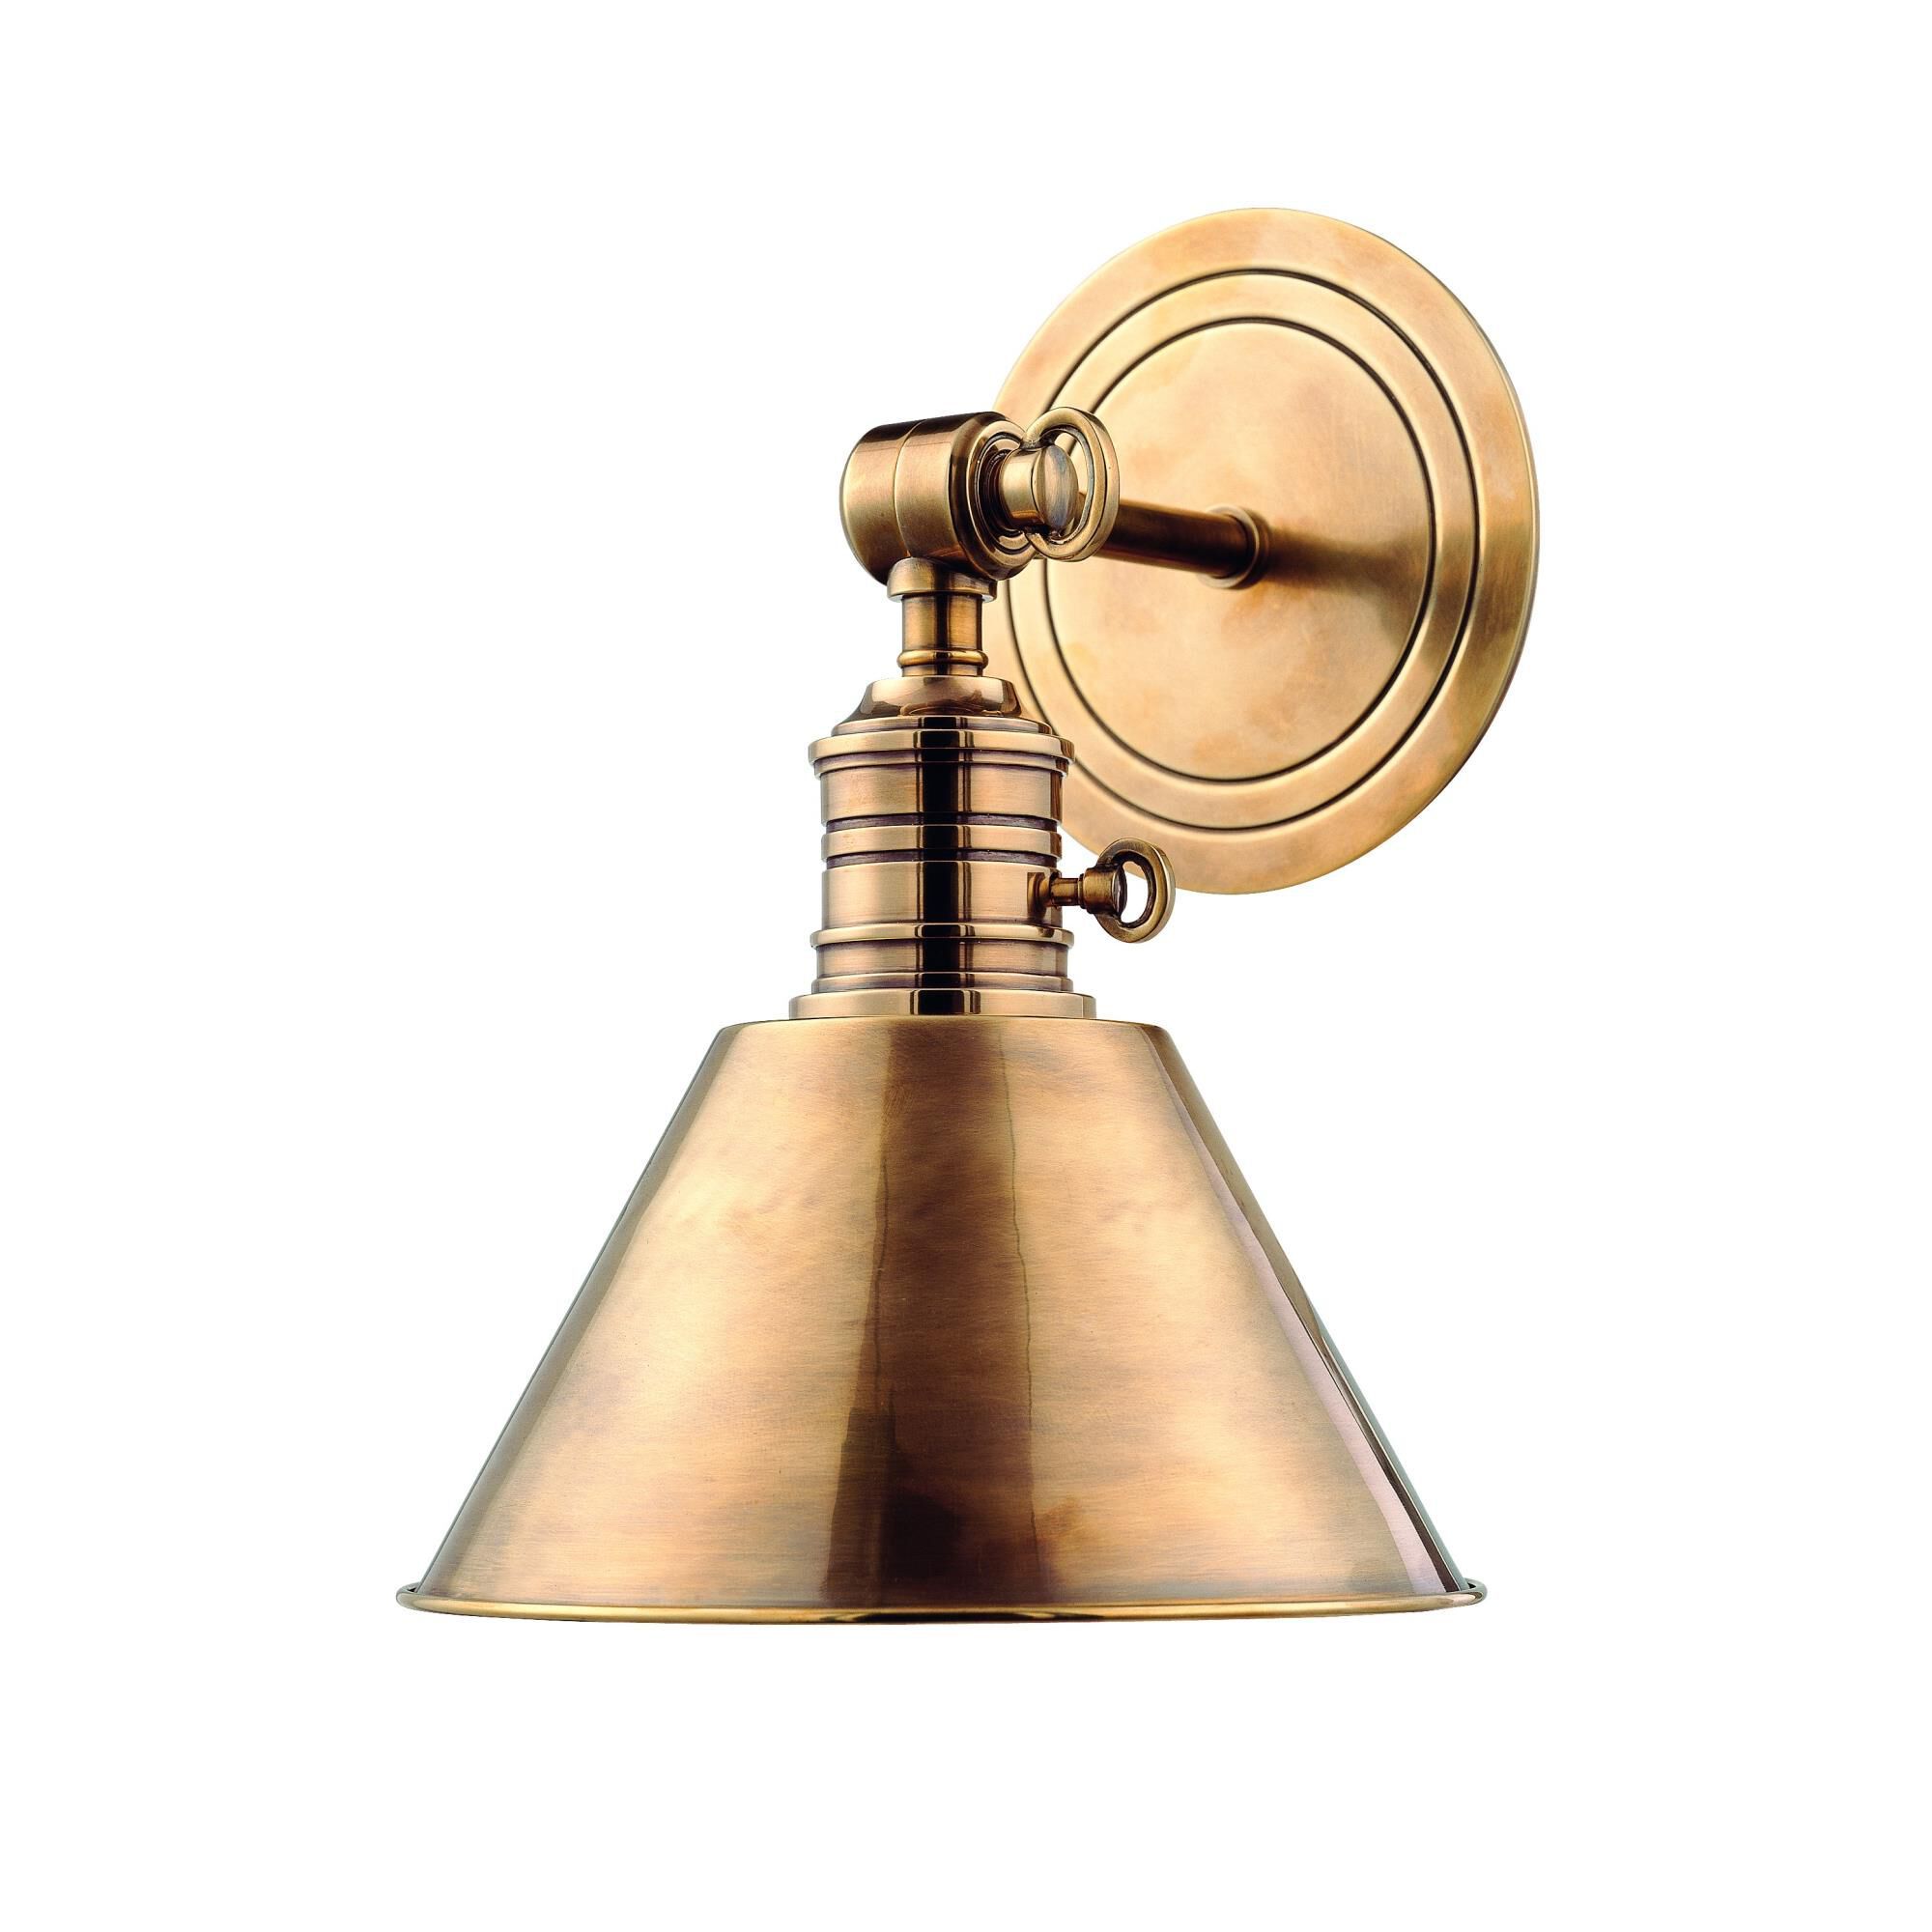 Garden City 8 Inch Wall Sconce from Hudson Valley Lighting | Capitol Lighting 1-800lighting.com | Capitol Lighting 1800lighting.com